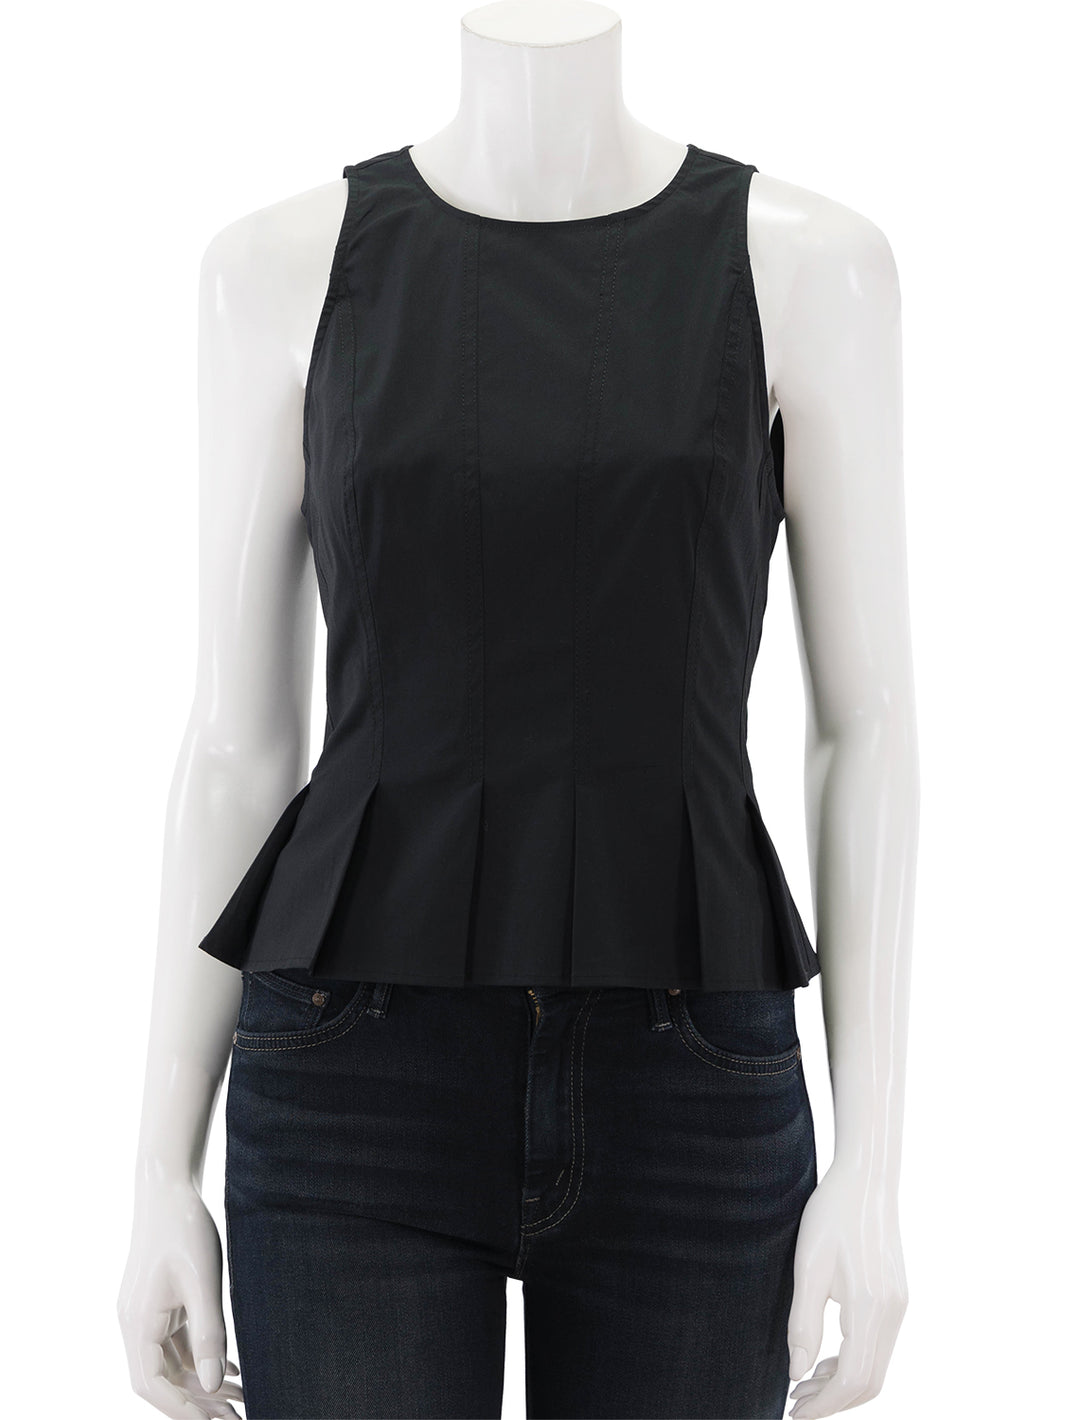 Front view of Veronica Beard's olympia top in black.